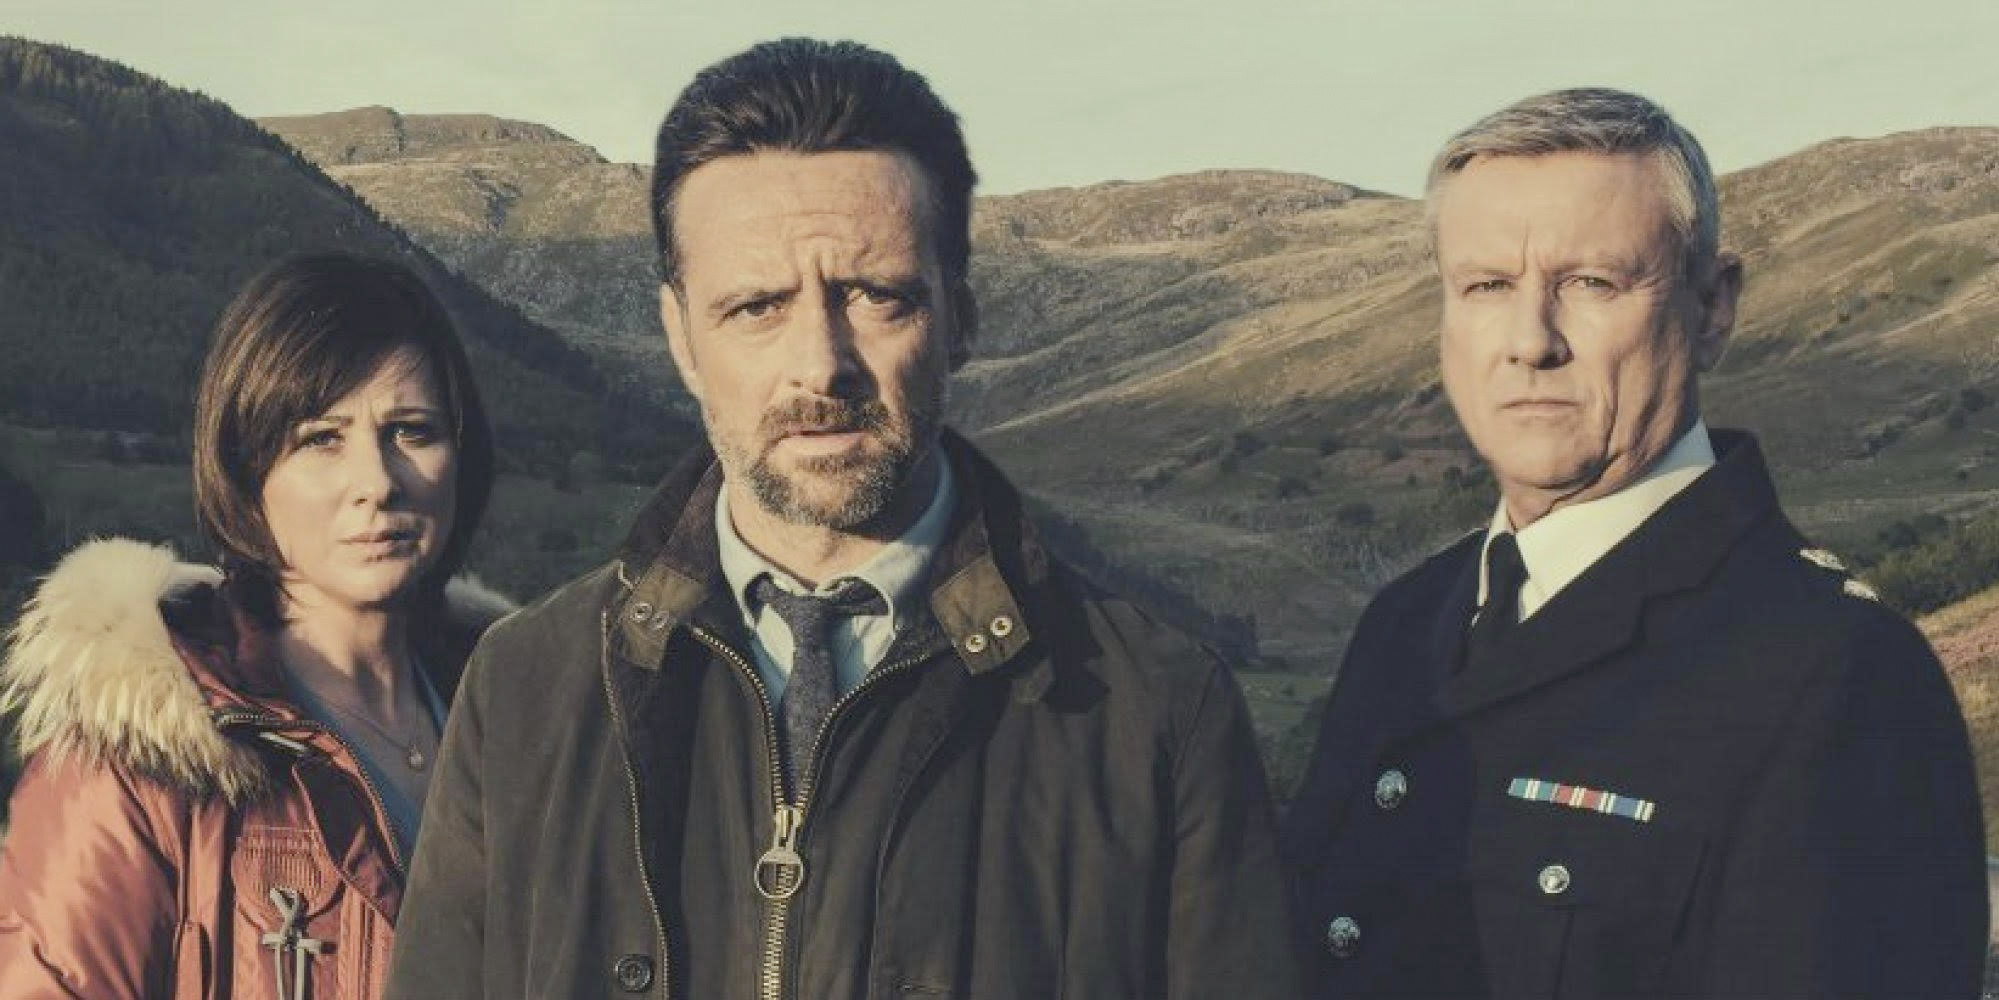 Heart of darkness: Hinterland’s real star is Ceredigion